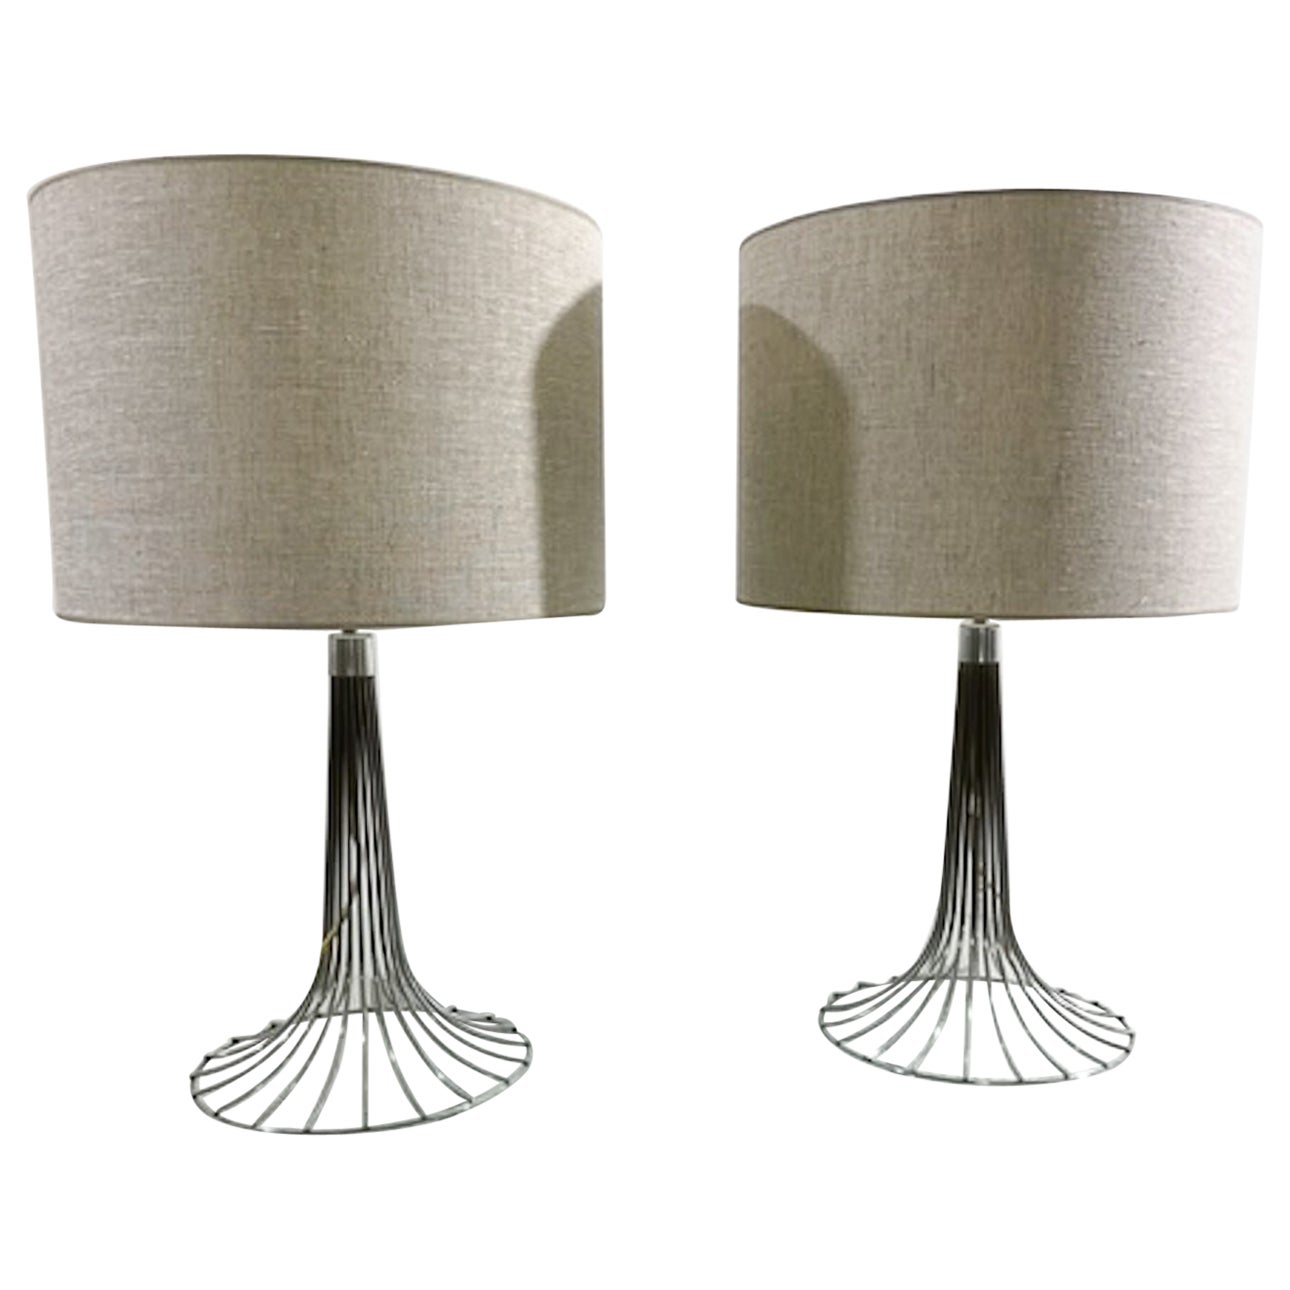 Mid-Century Modern Space Age Pair of Chrome Table Lamps, 1970s For Sale